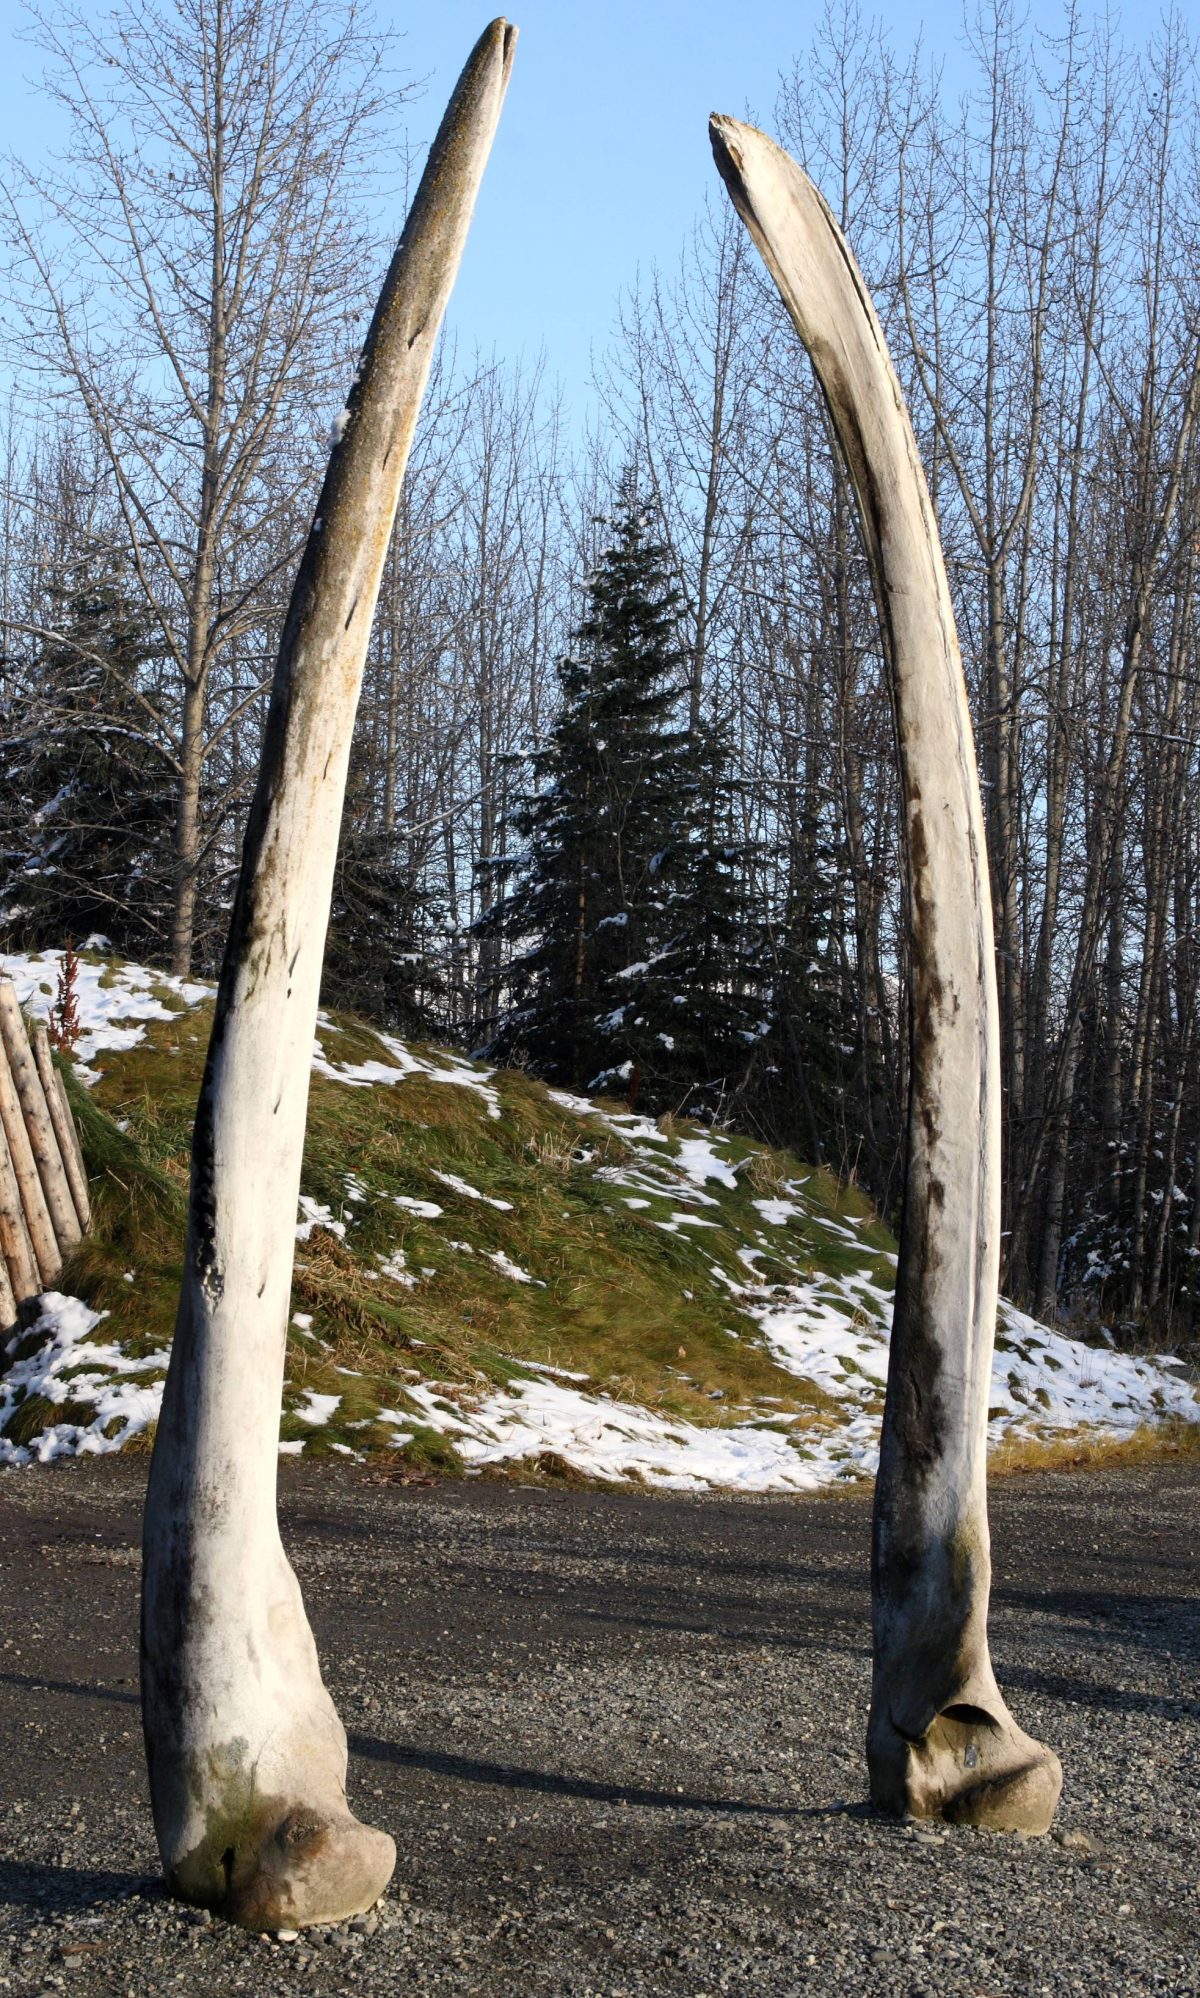 Located in Anchorage, the Alaska Native Heritage Centre is an educational and cultural hub that informs and educates the public about the Native Alaskan tribes that populate the state.